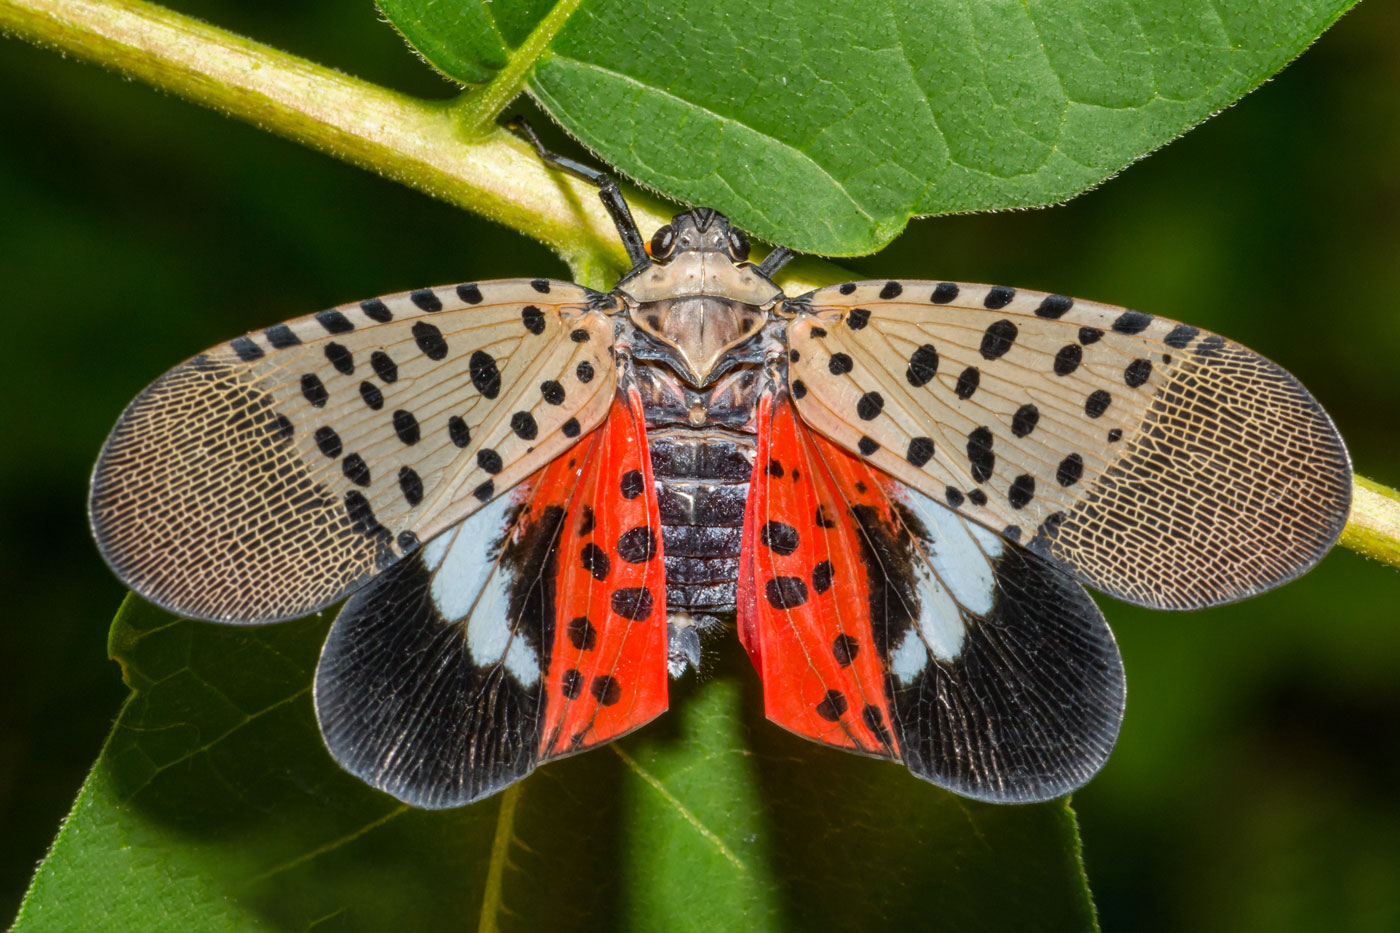 spotted lanternfly, moth with grey, black and red markings